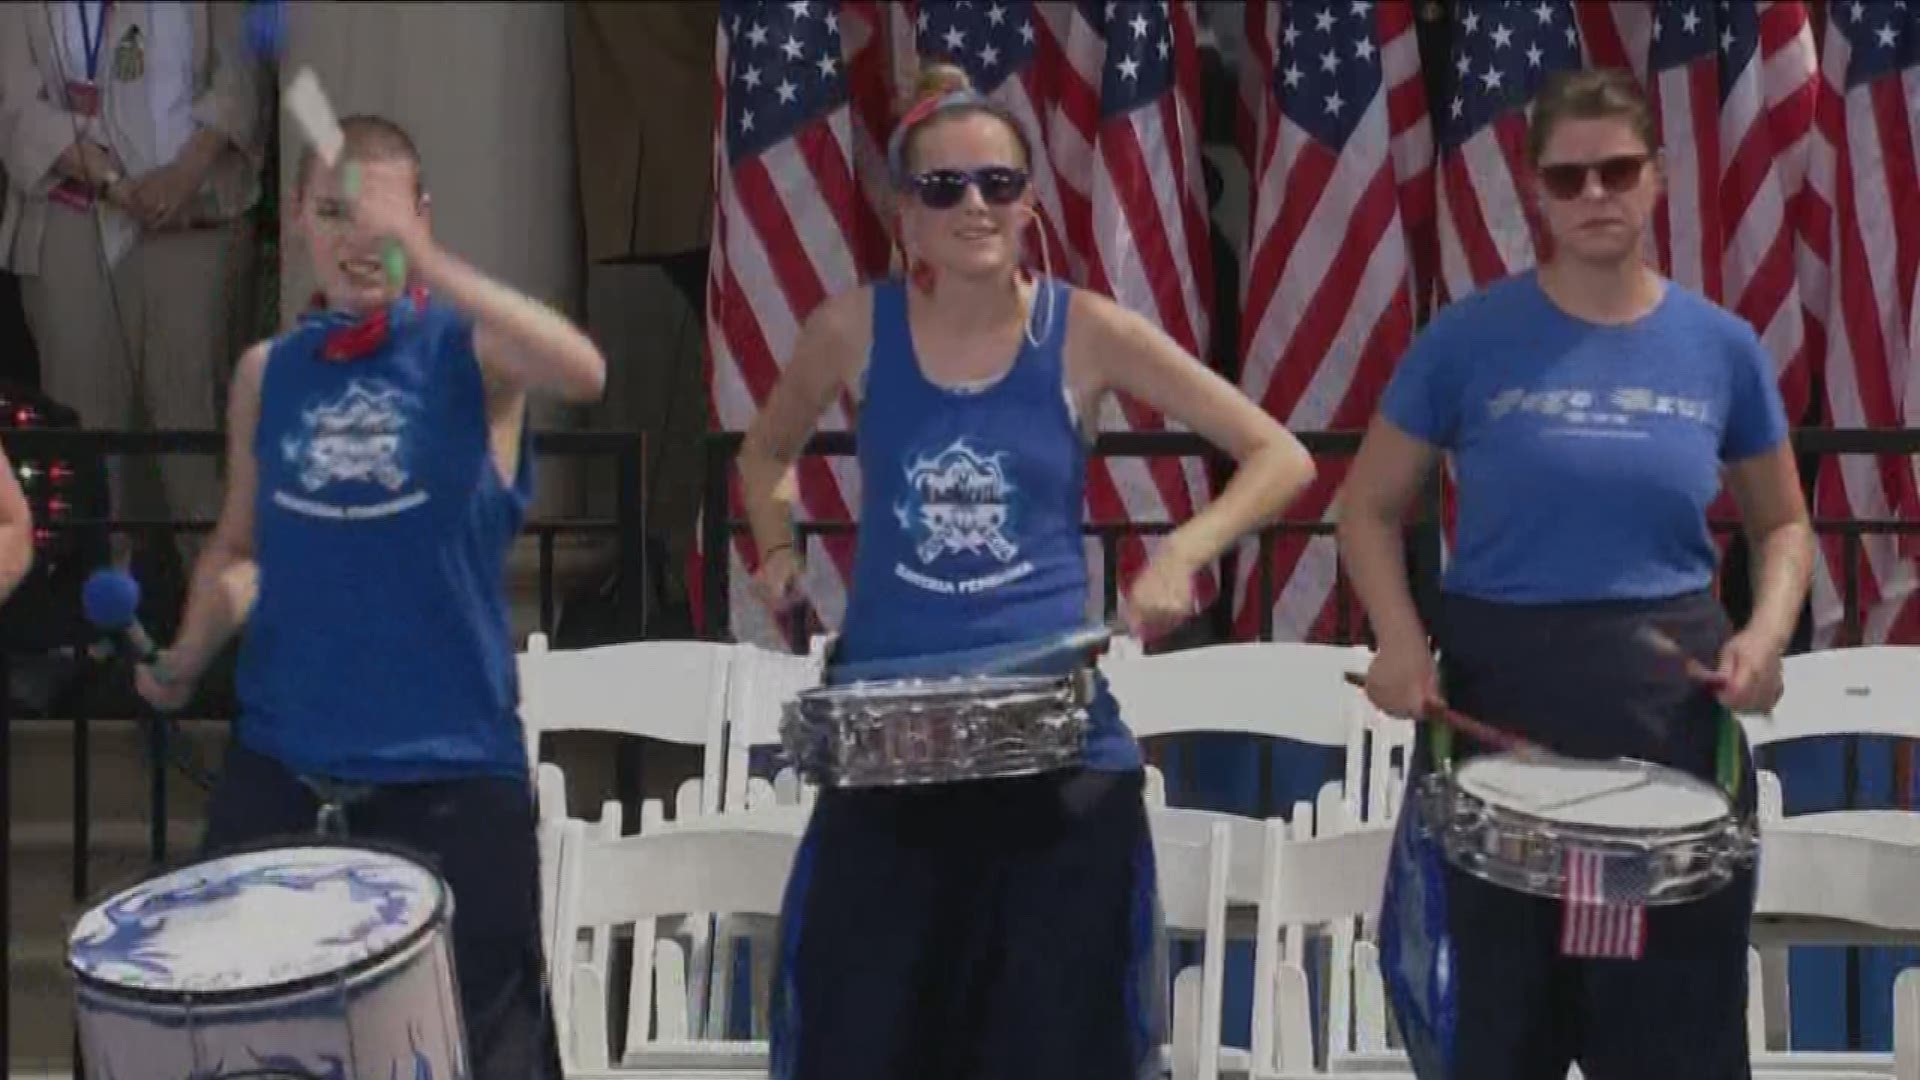 A team of female drummers whipped up the crowd at the Women's World Cup victory parade in New York City. The U.S. women's national soccer team won their fourth World Cup this month.